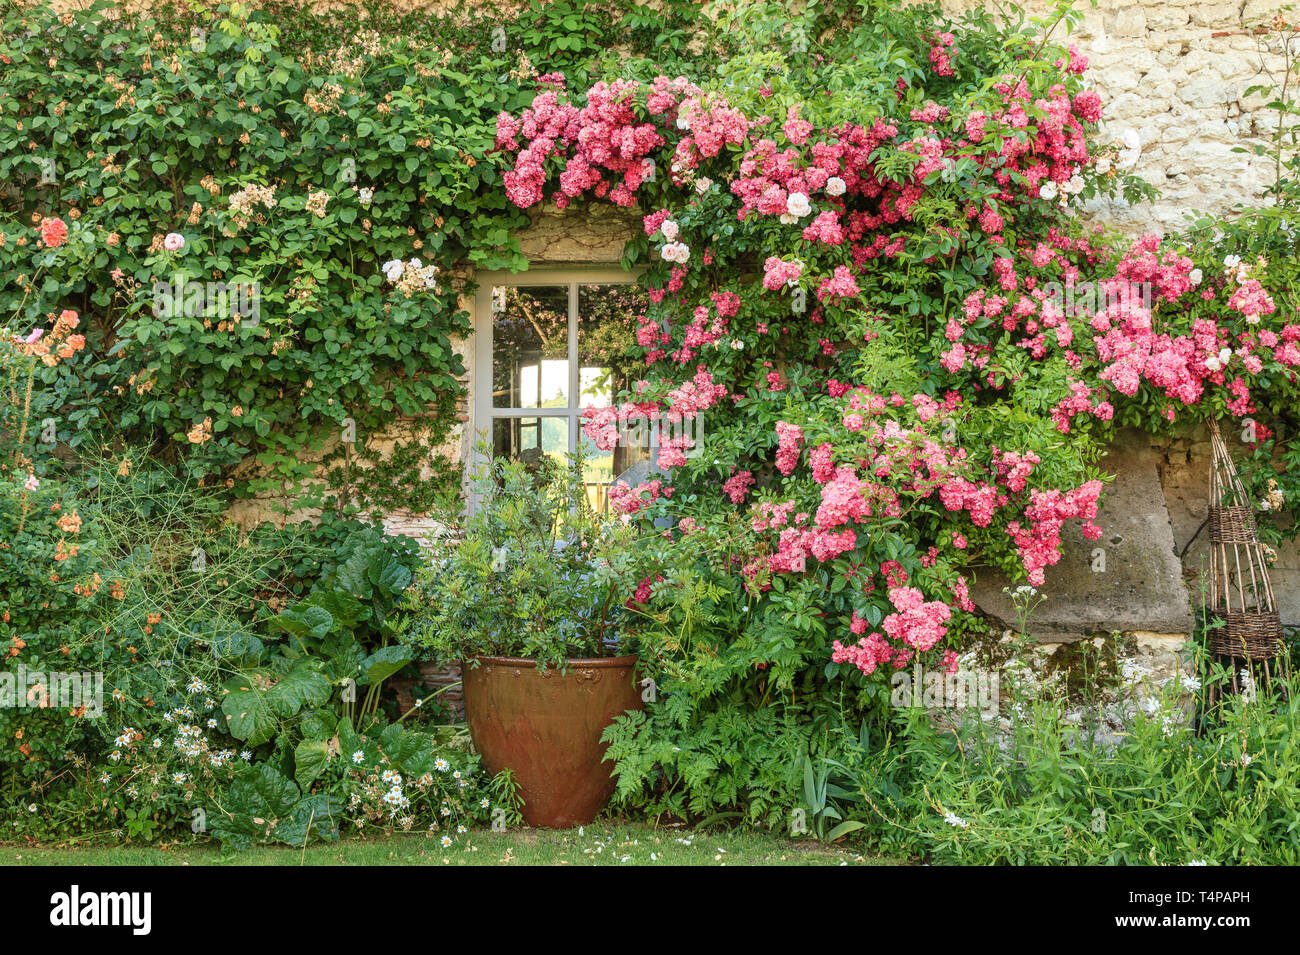 Roquelin’s gardens, Les jardins de Roquelin, France : the house and the flowery inner courtyard (obligatory mention of the garden name and editorial o Stock Photo